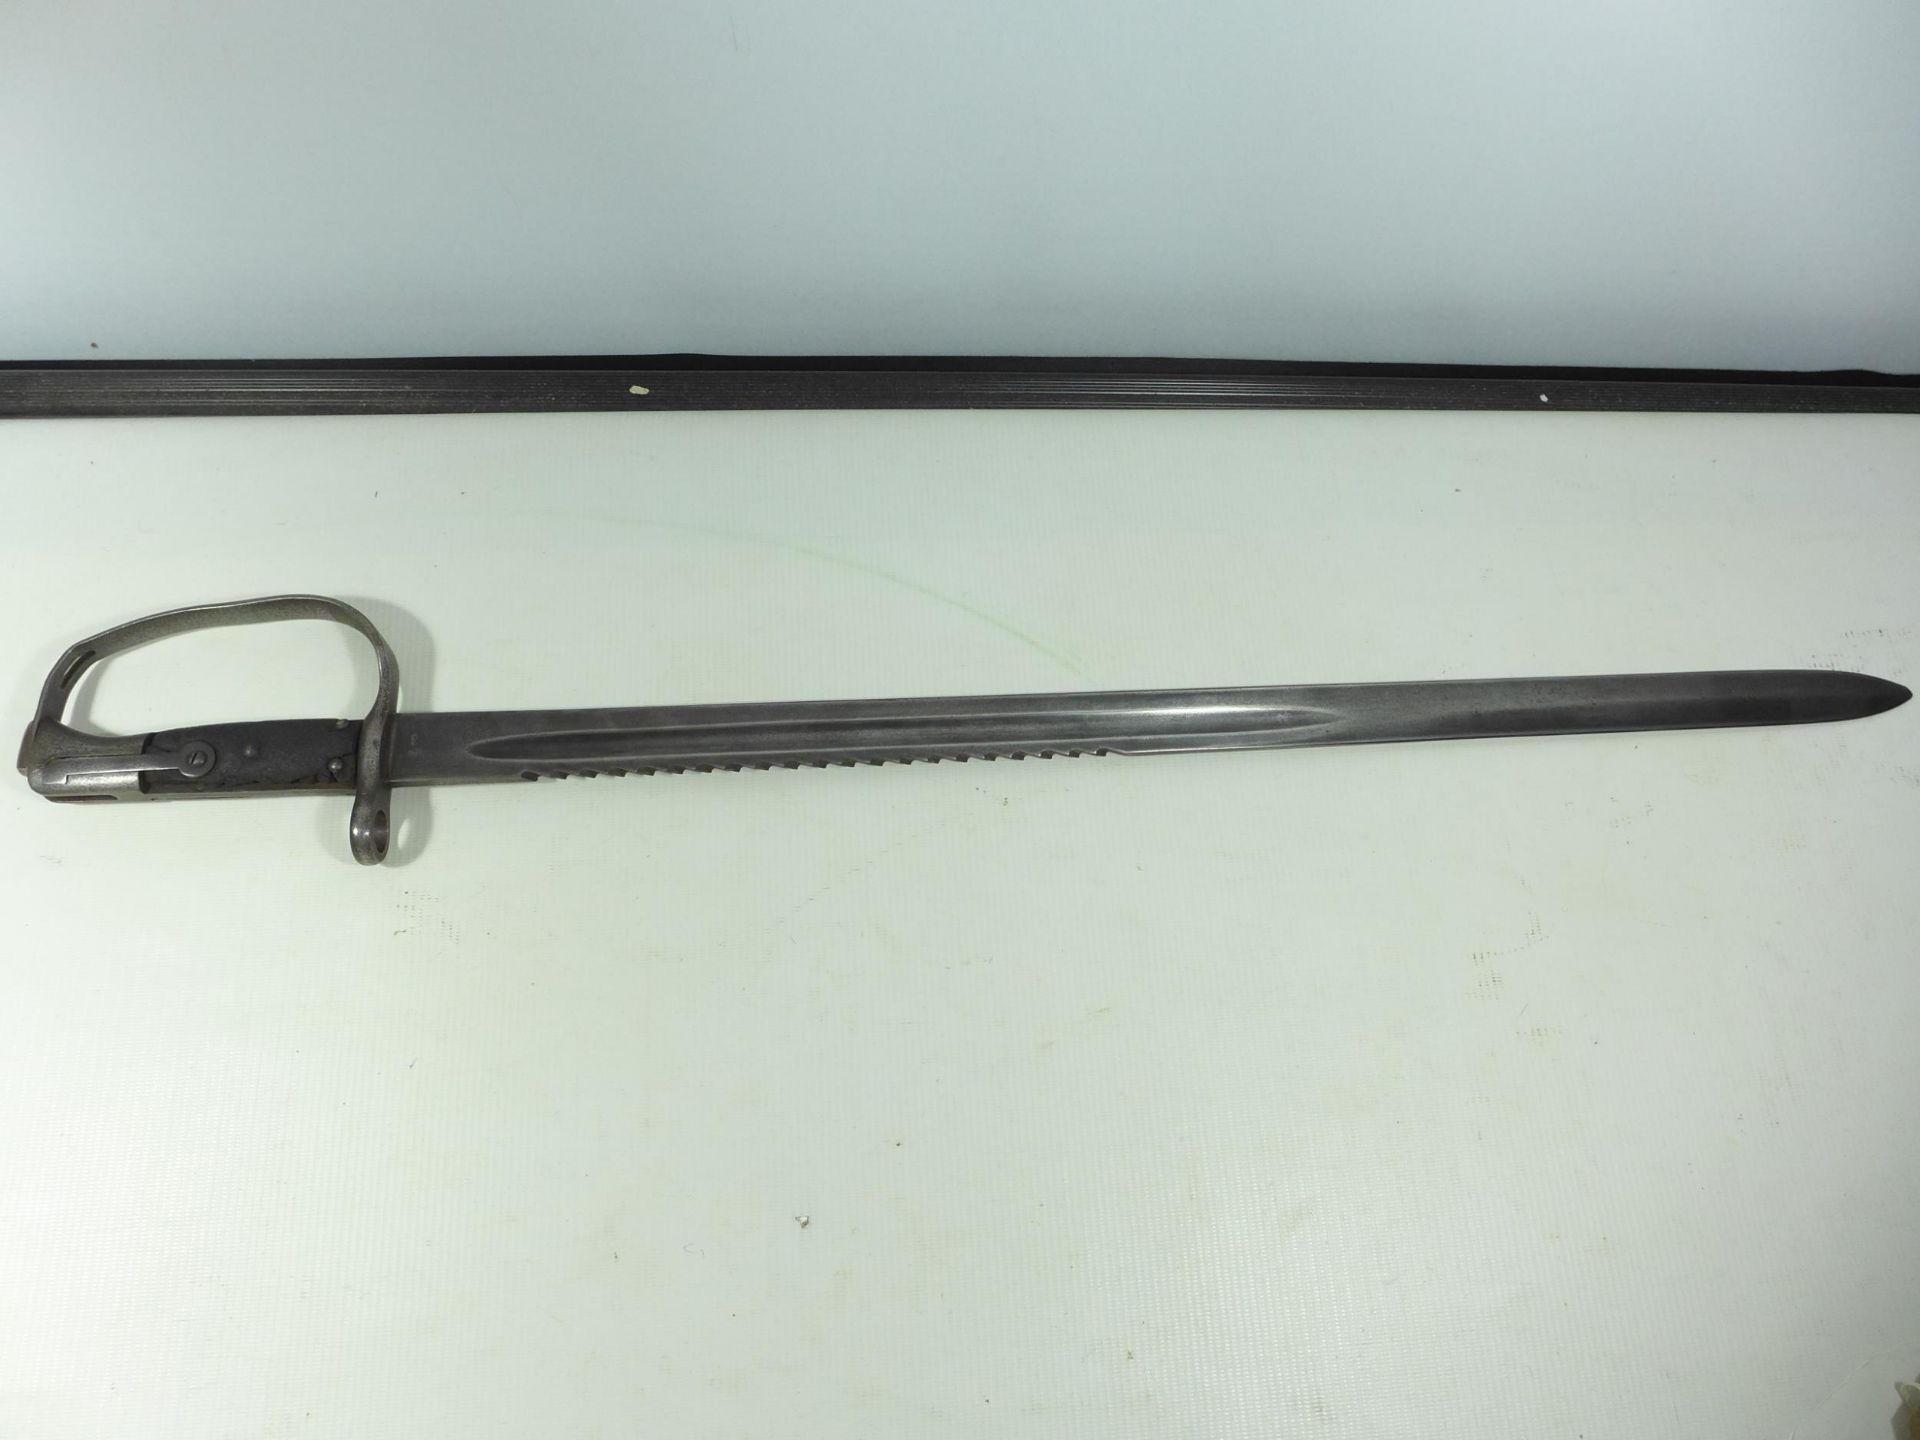 A LATE 19TH/EARLY 20TH CENTURY SAWBACK BAYONET FOR A MARTINI HENRY CARBINE, 65CM BLADE - Image 3 of 9